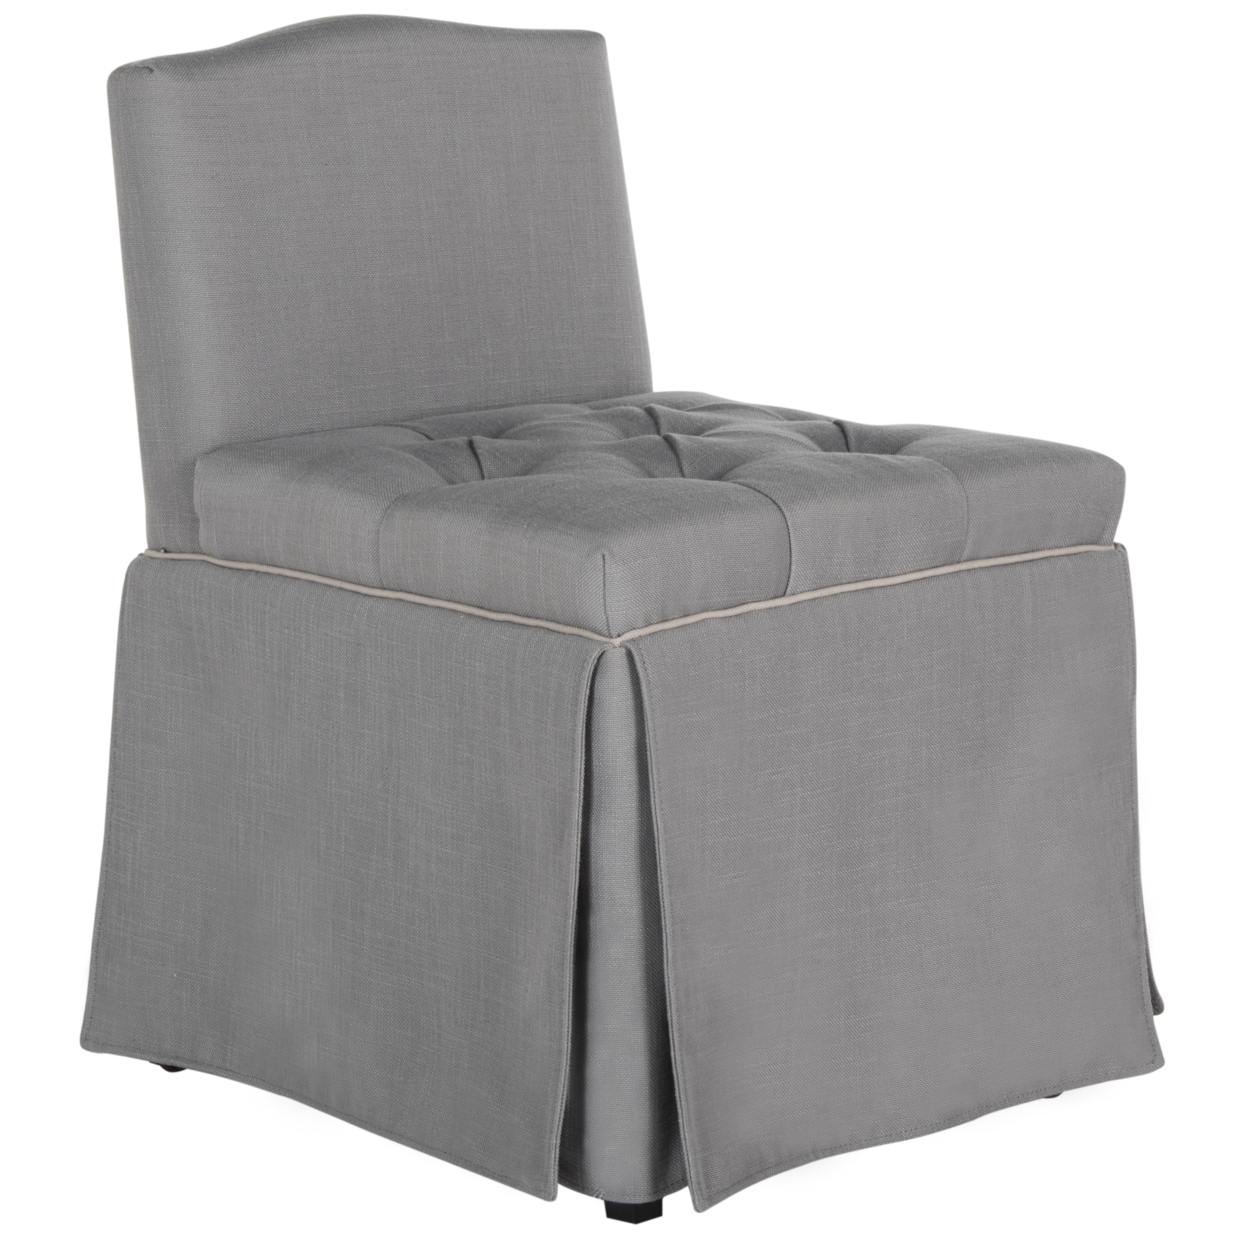 SAFAVIEH Betsy Vanity Chair Artic Grey / Taupe